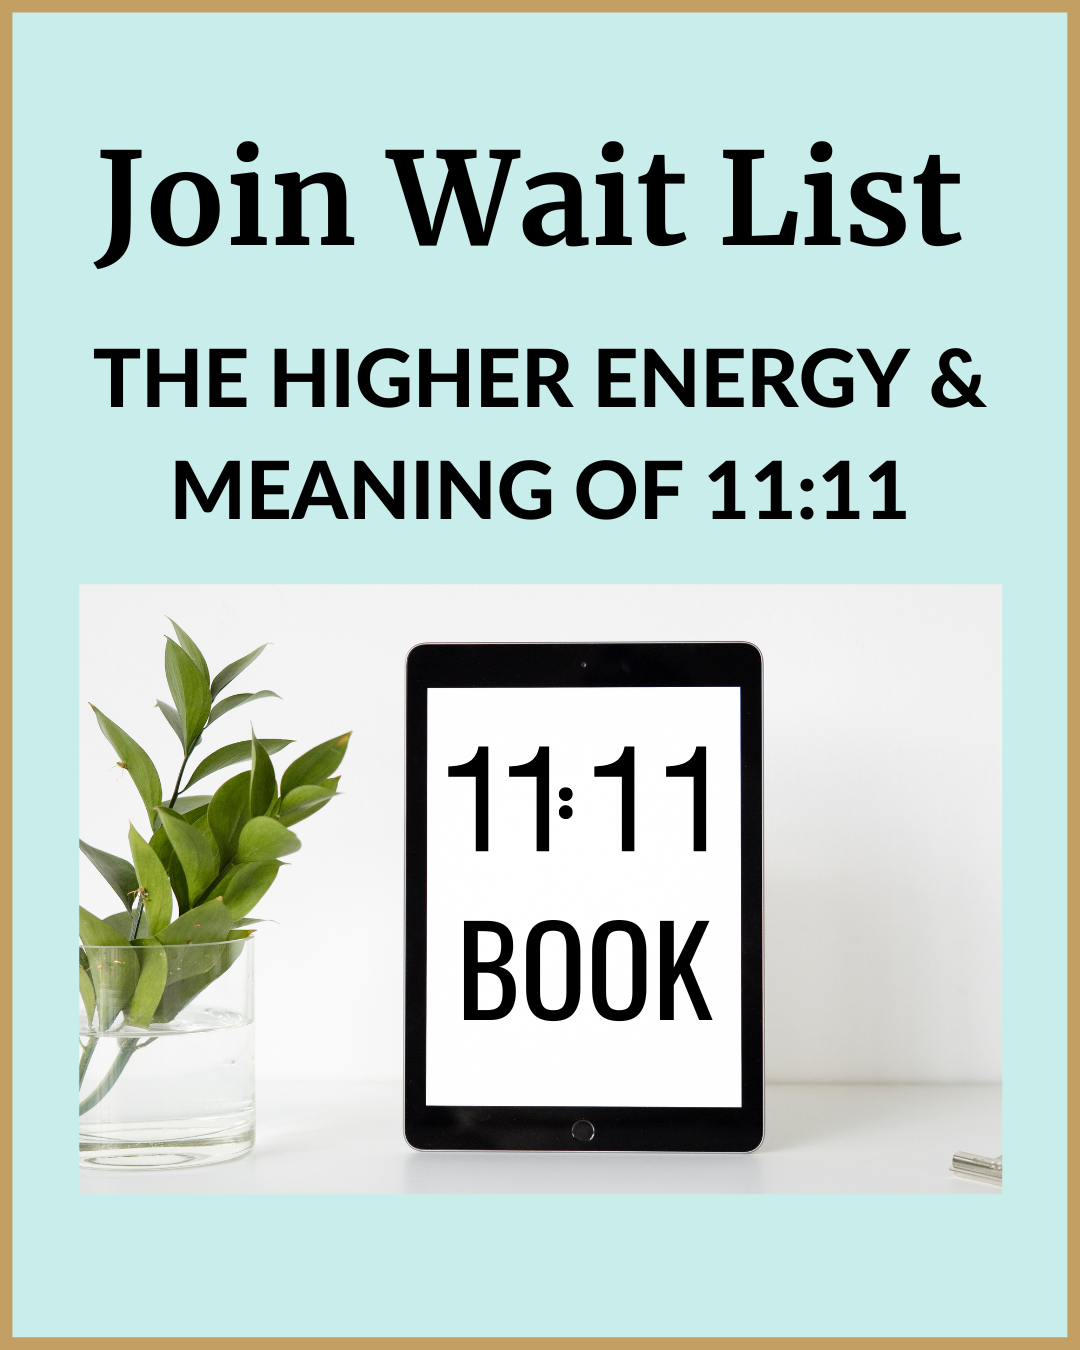 Free 11:11 book the higher energy and meaning of 11:11